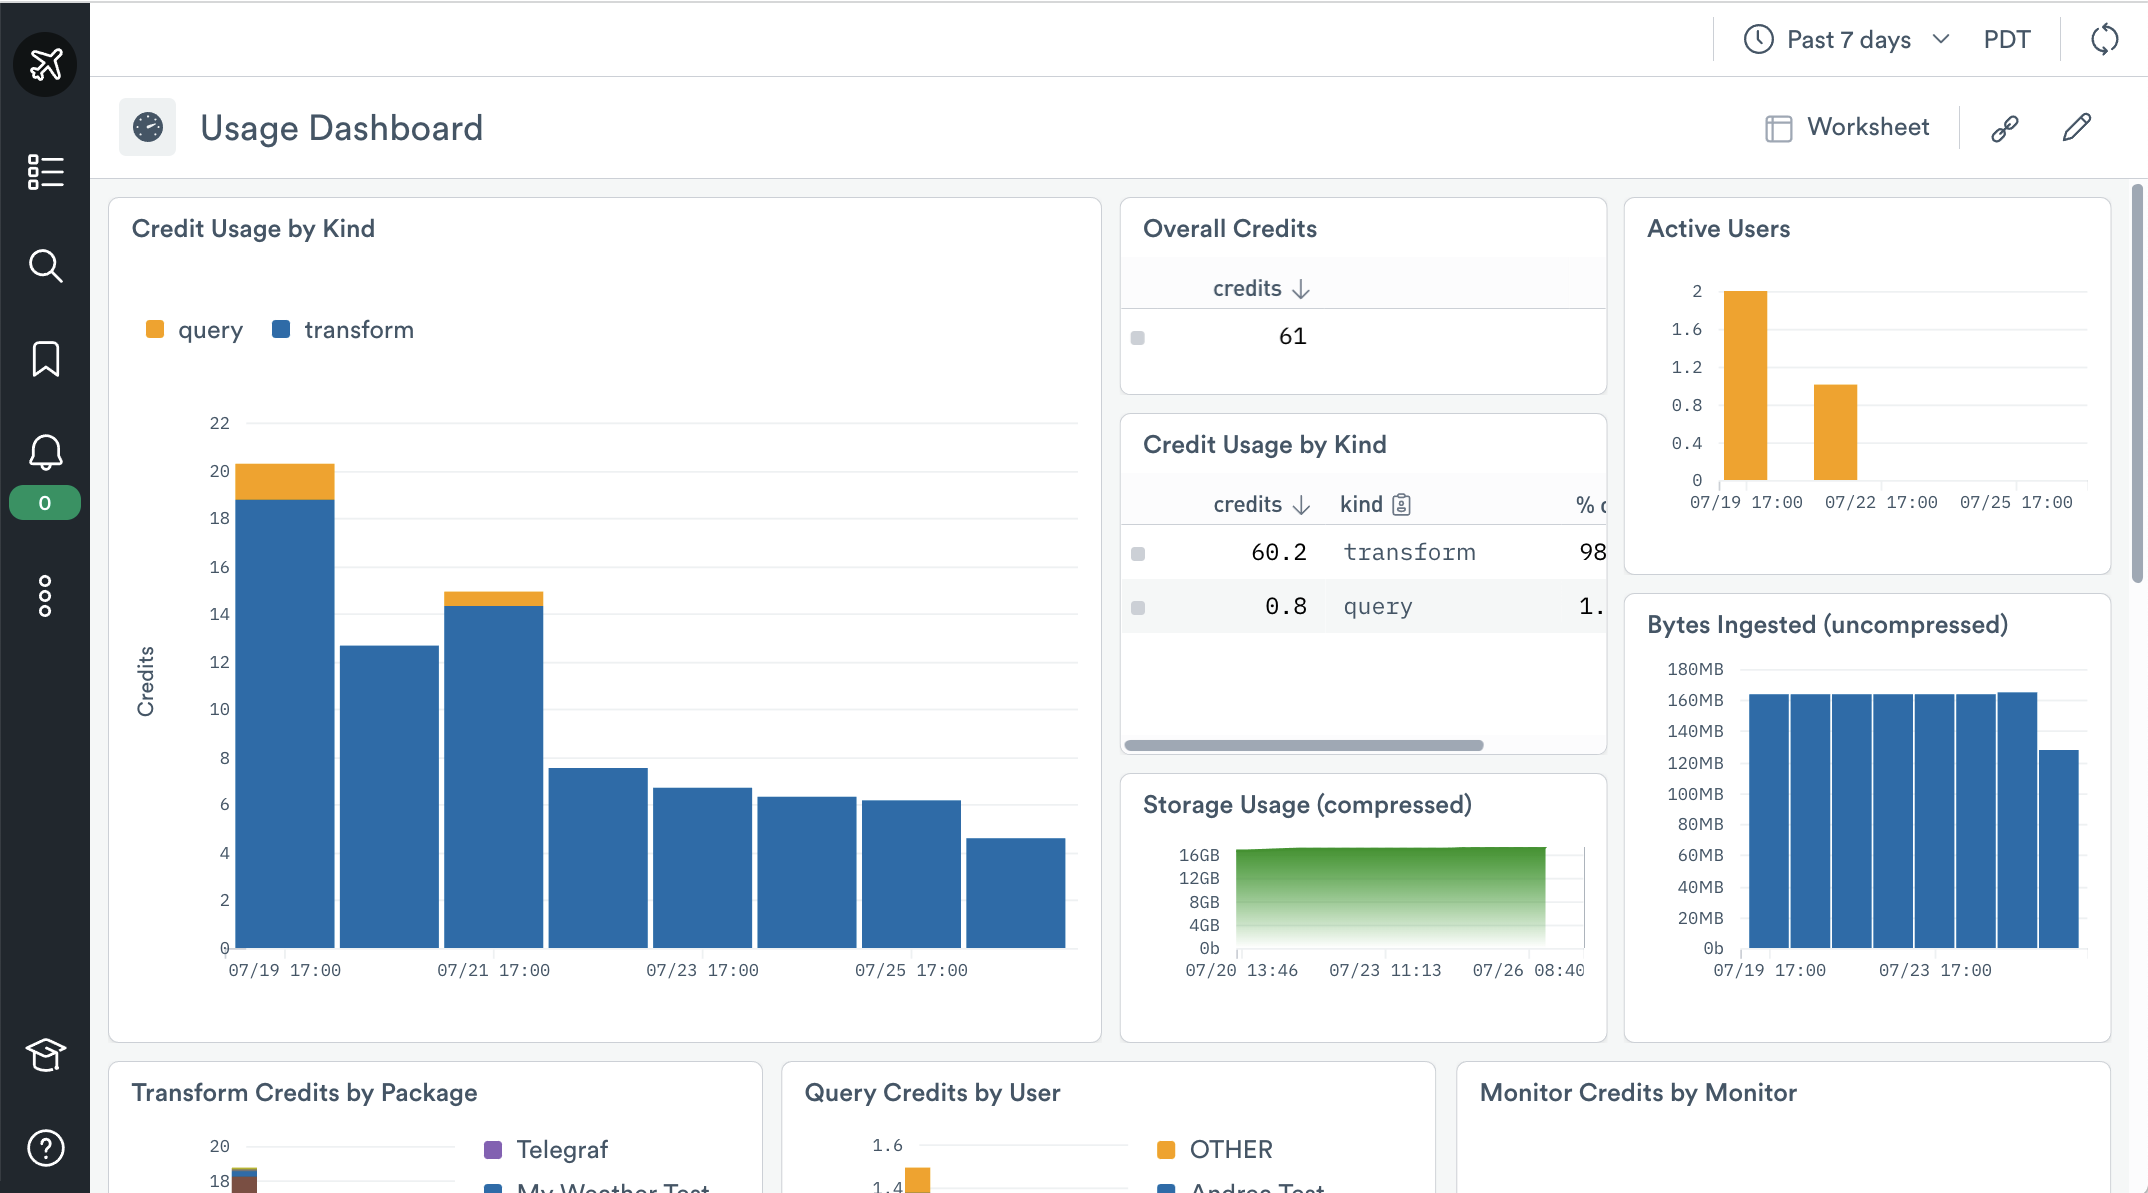 Usage dashboard, with cards for credit usage by kind, active users, compressed storage usage, and more.